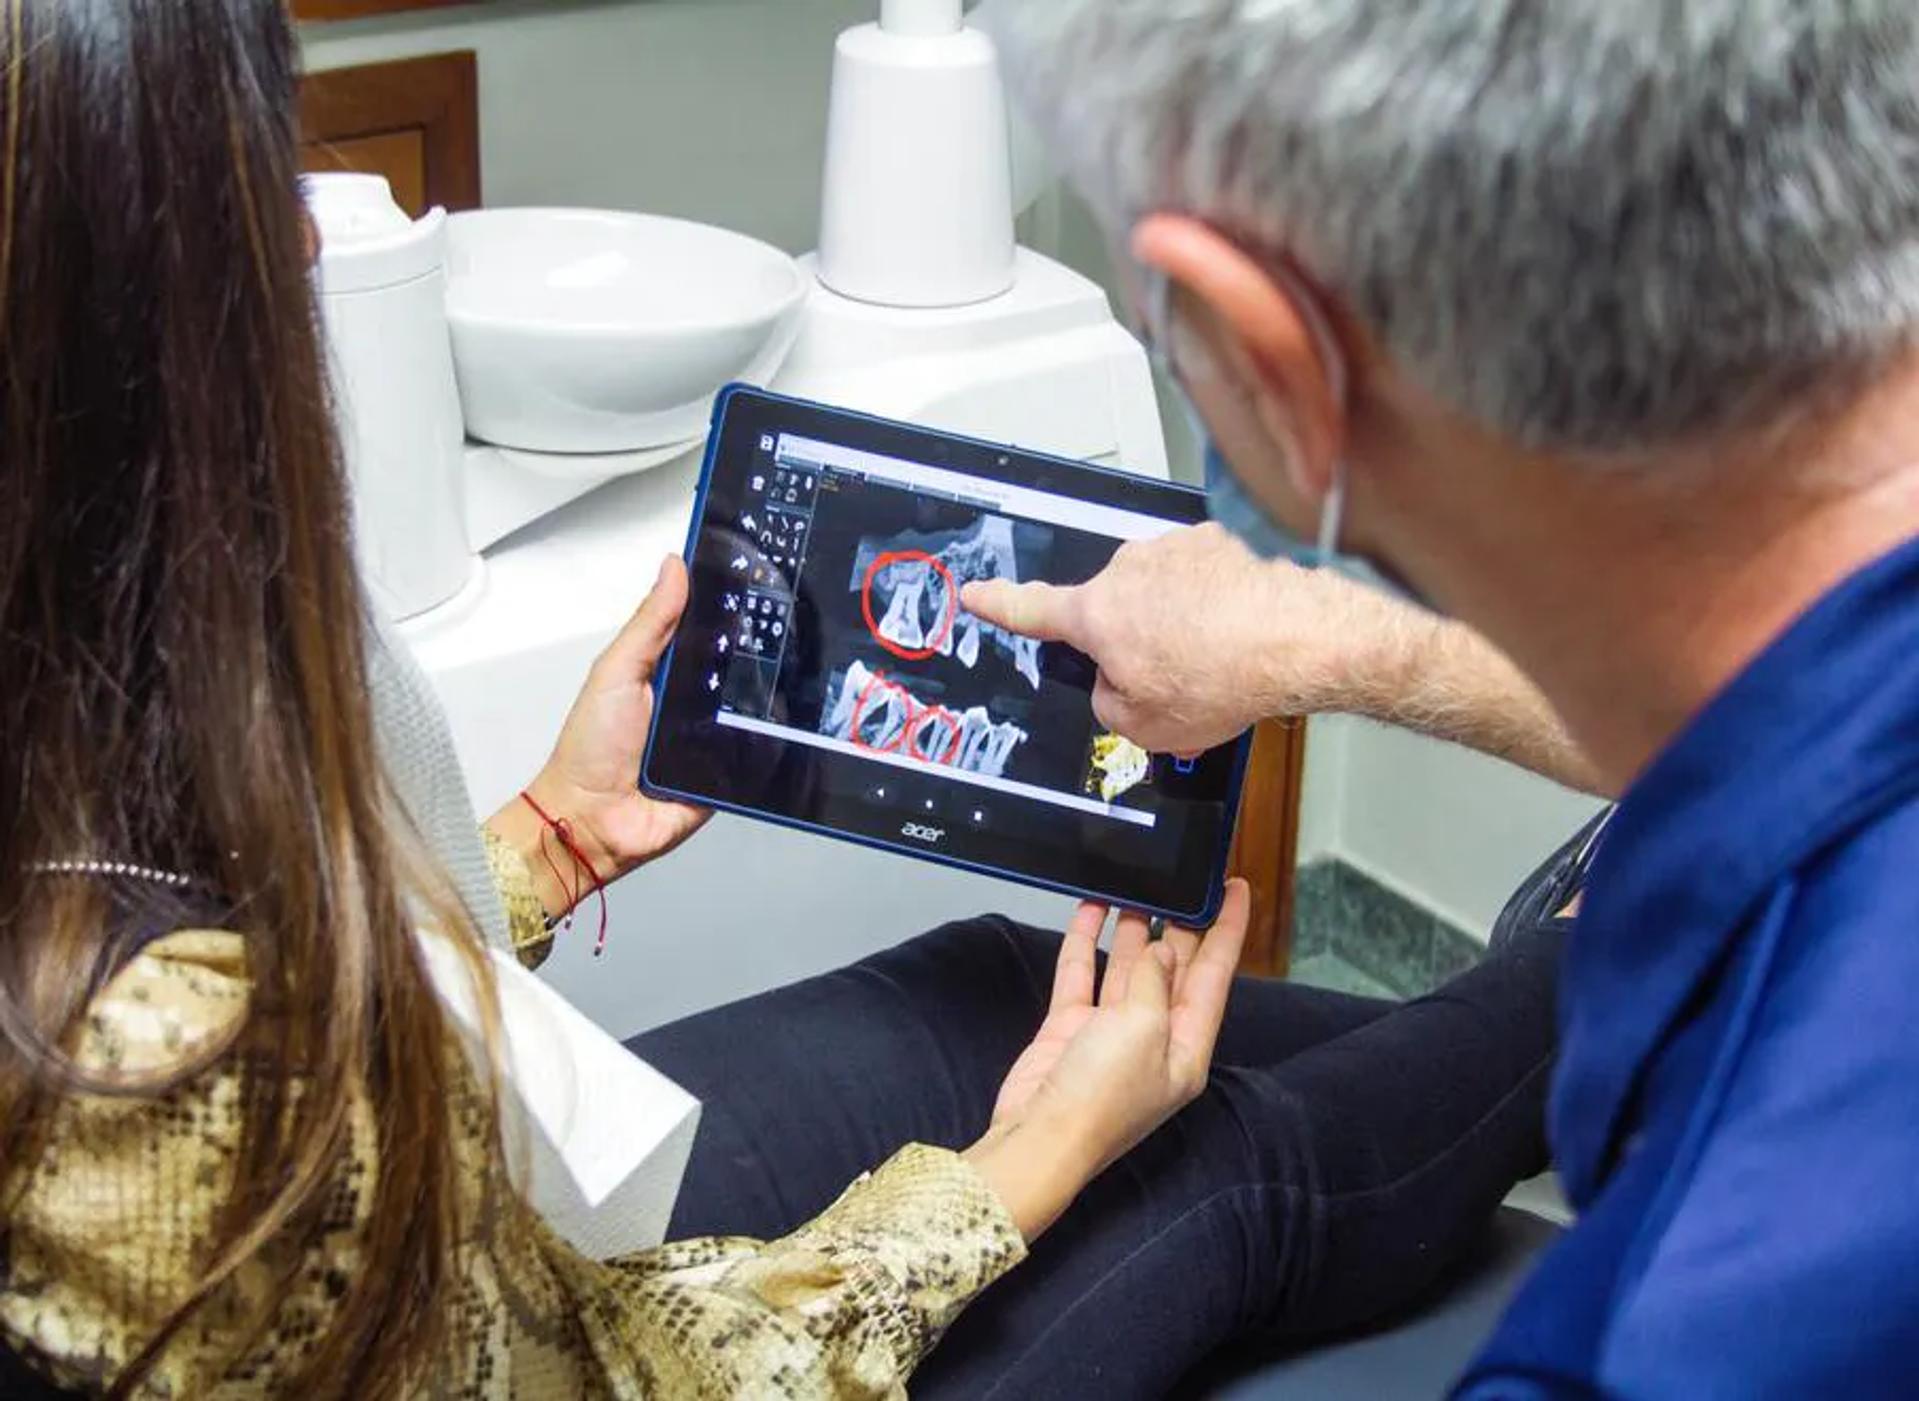 A doctor and patient looking at an x-ray on a tablet